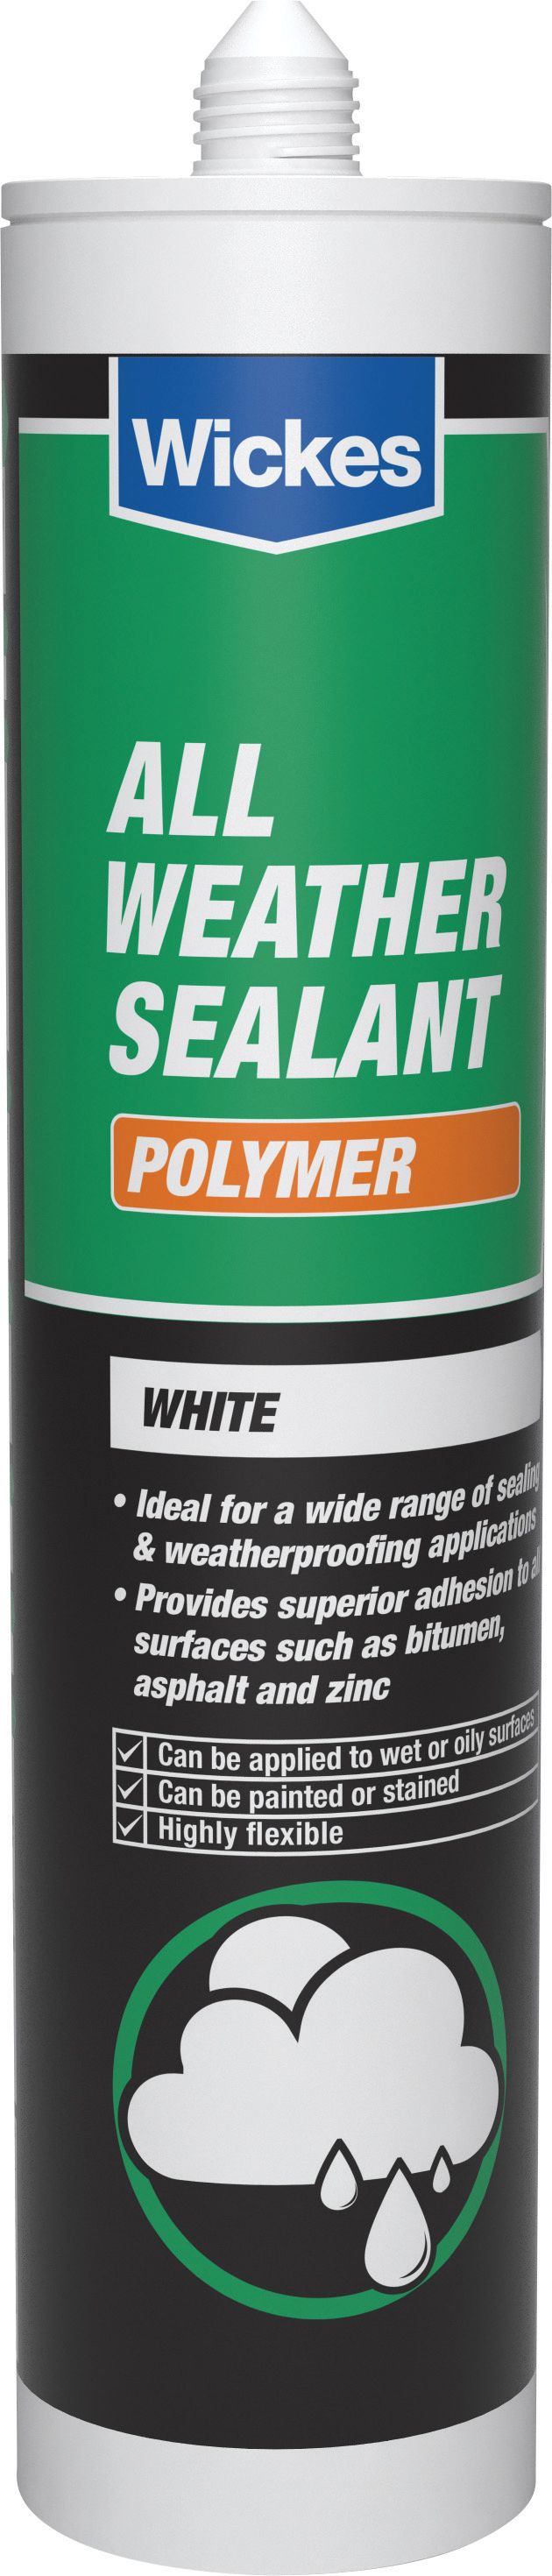 Image of Wickes All Weather Polymer Sealant - White 300ml